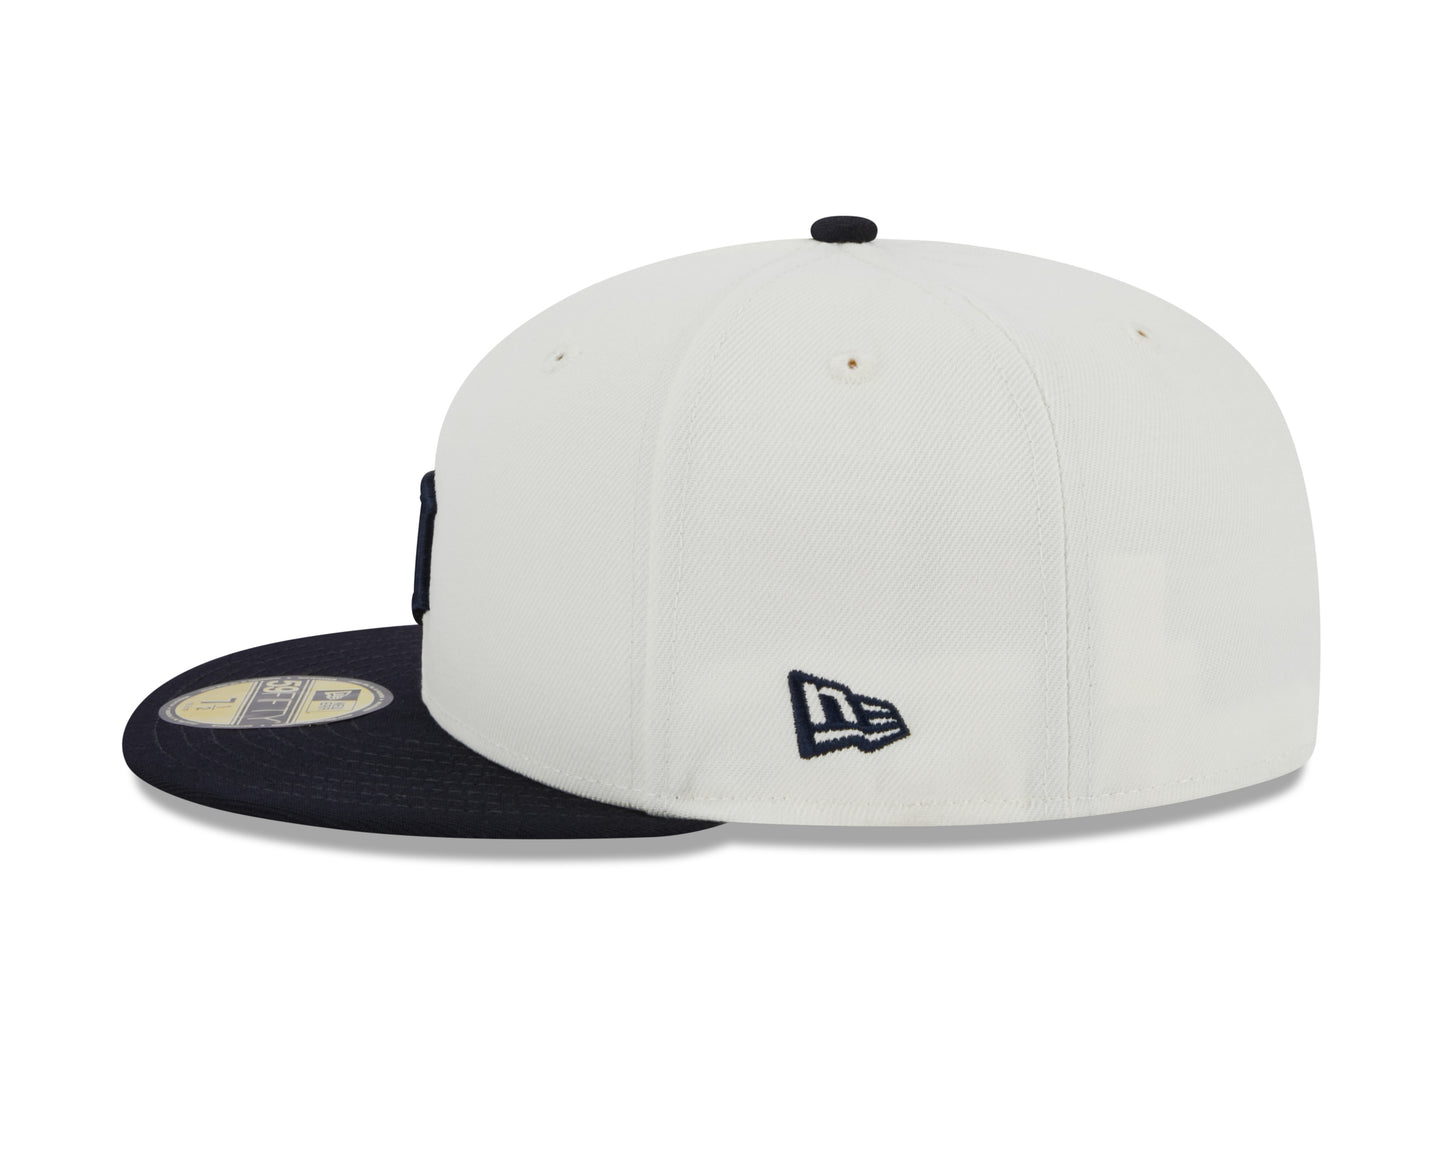 Detroit Tigers 1984 World Series Cream/Navy New Era Retro 59FIFTY Fitted Hat